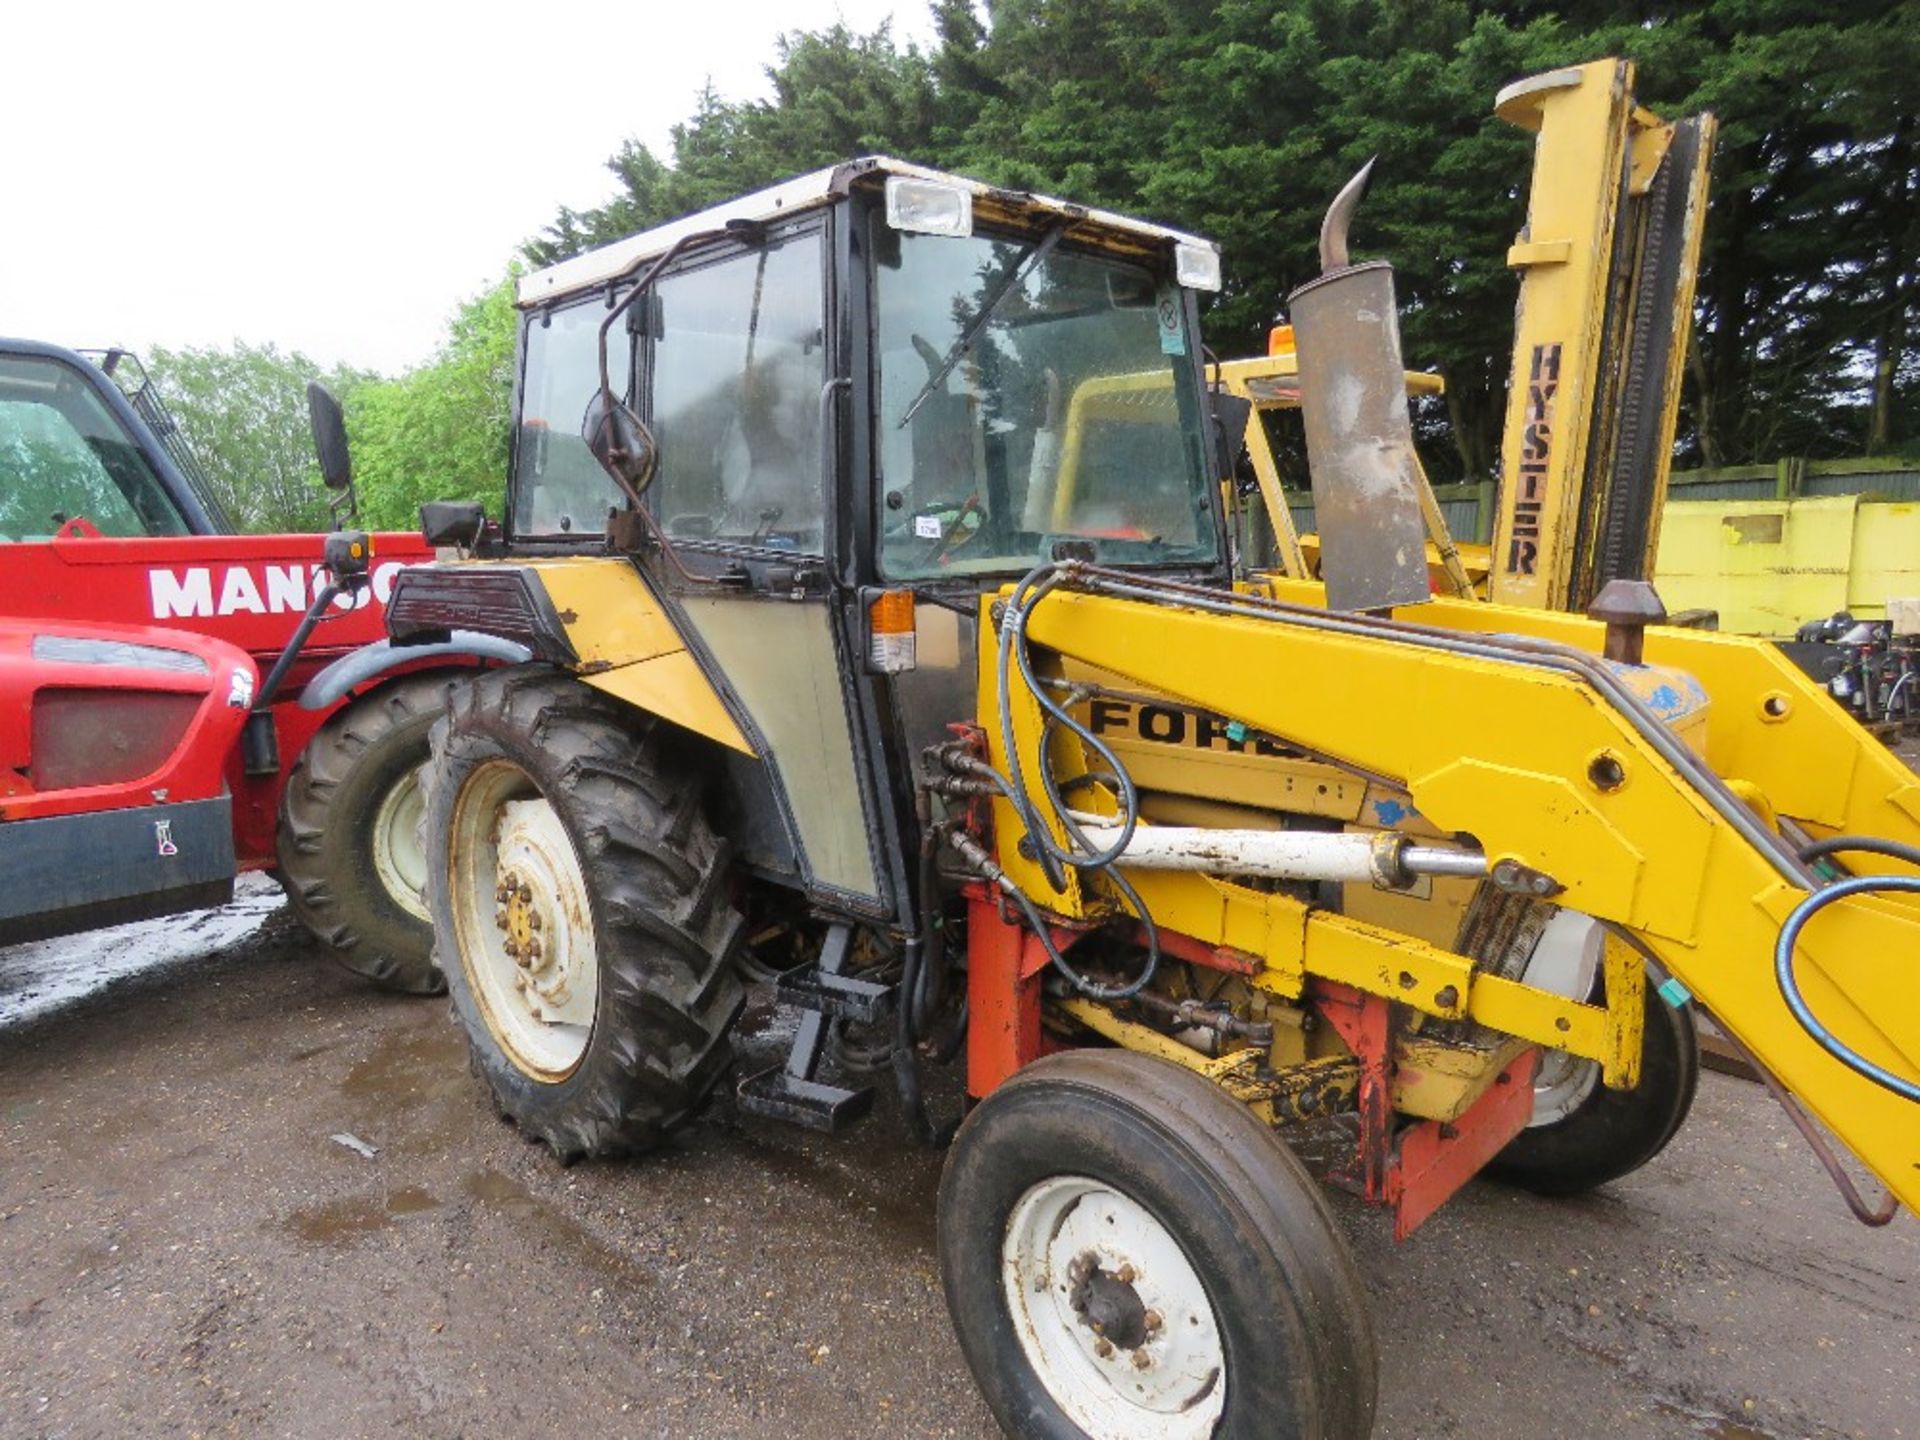 FORD 2WD TRACTOR WITH FOREND LOADER. REG:F940 WFW (LOG BOOK TO APPLY FOR). COMES WITH BUCKET, PALLET - Image 2 of 17